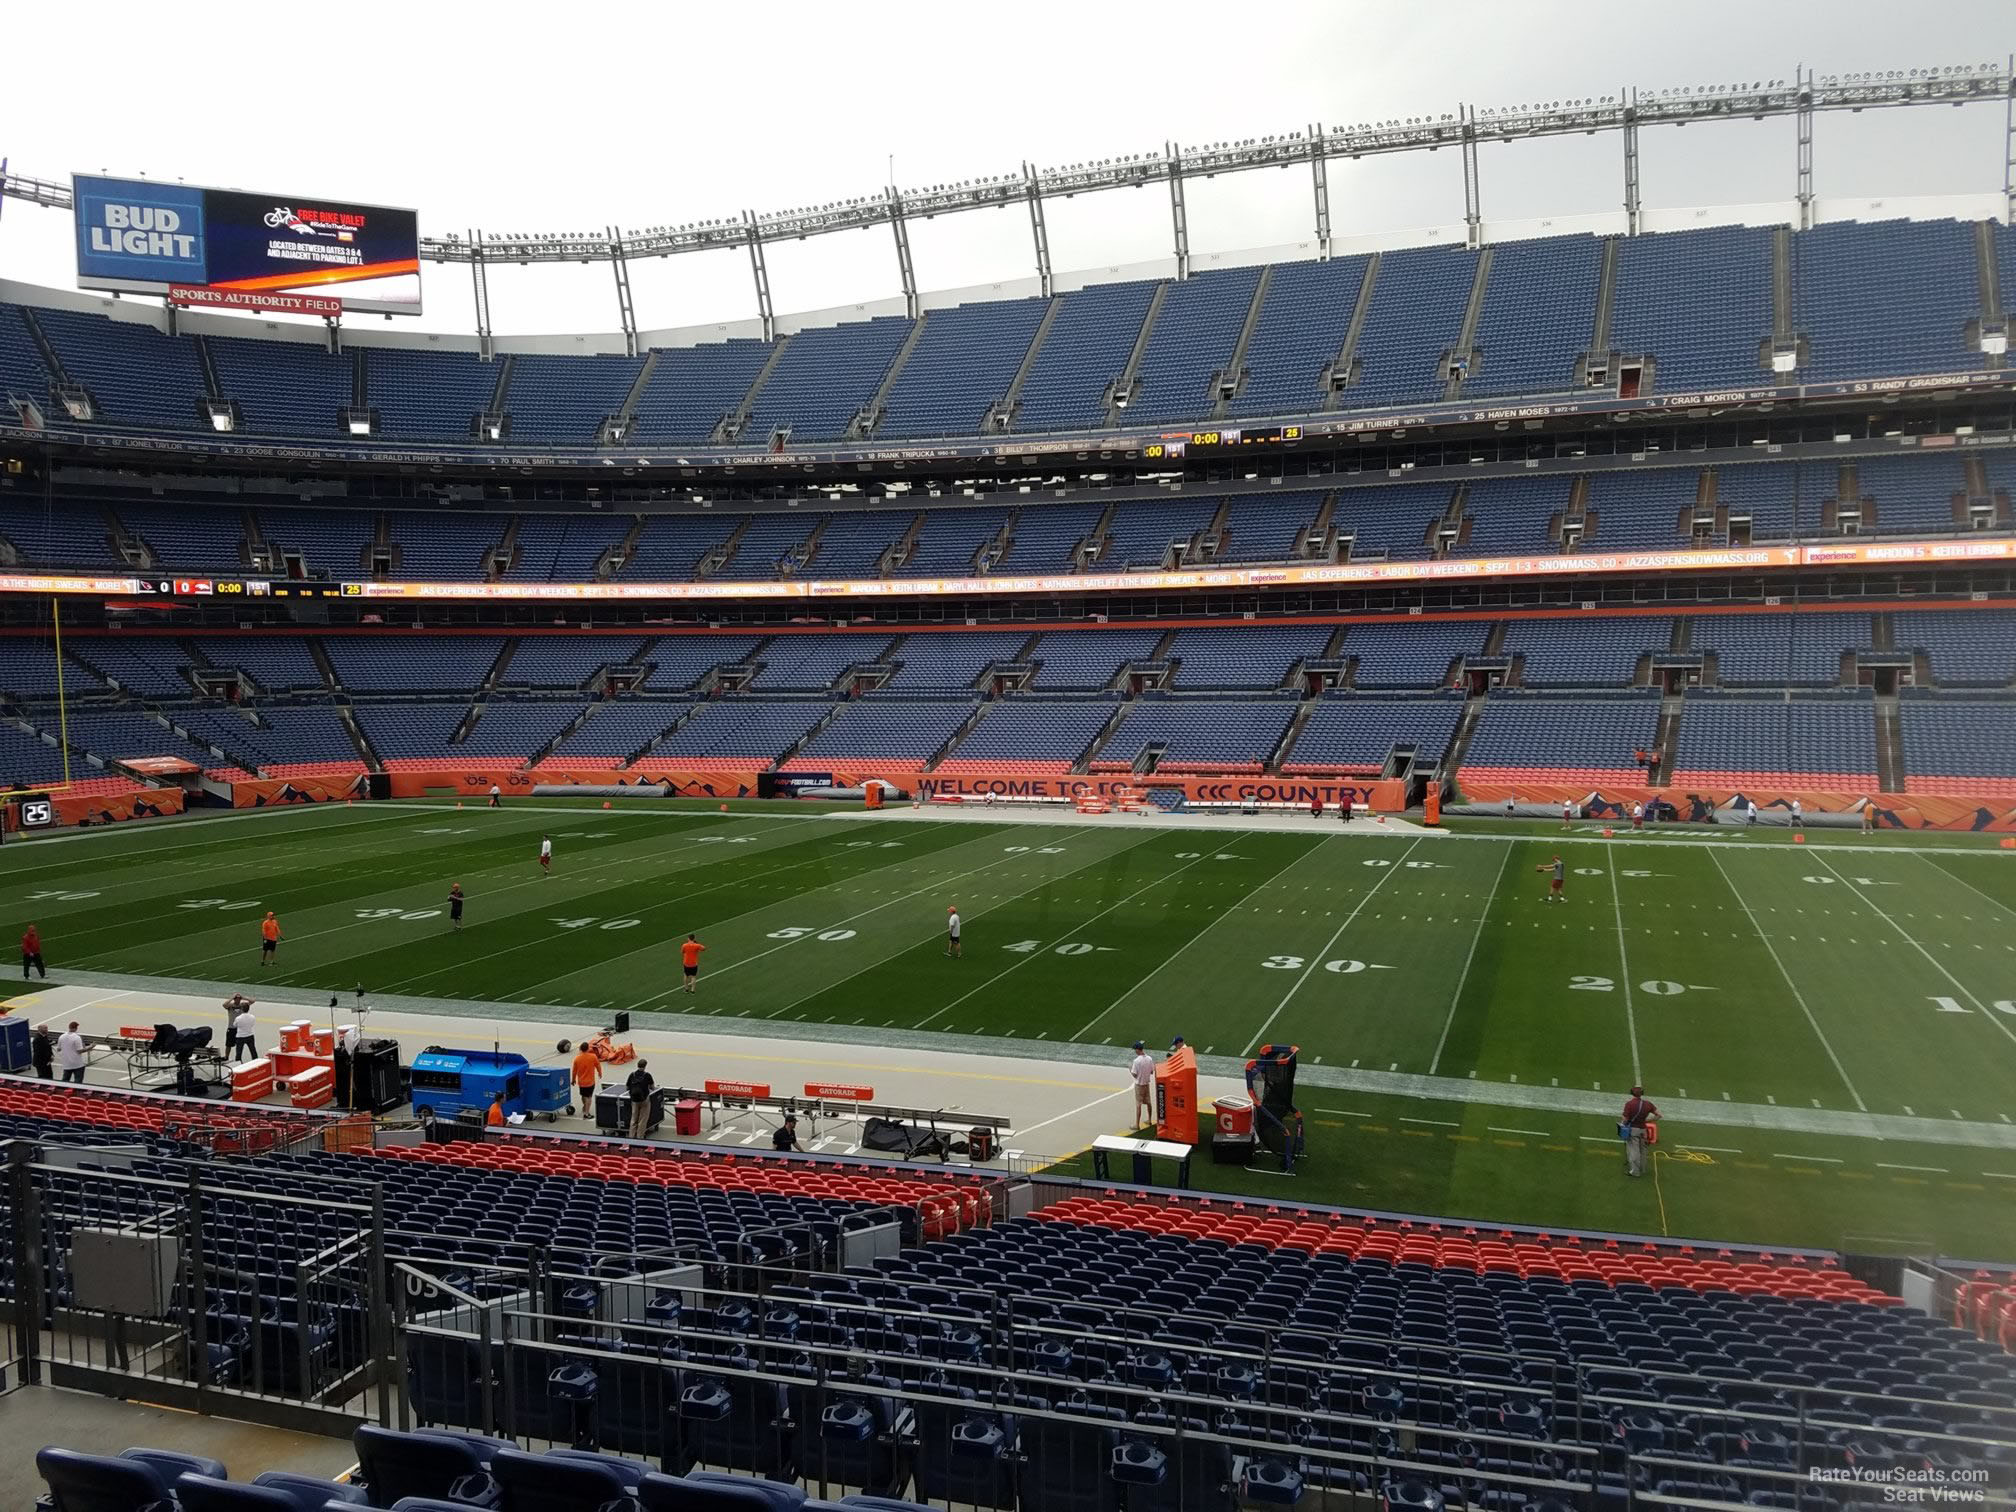 section 103, row 30 seat view  - empower field (at mile high)